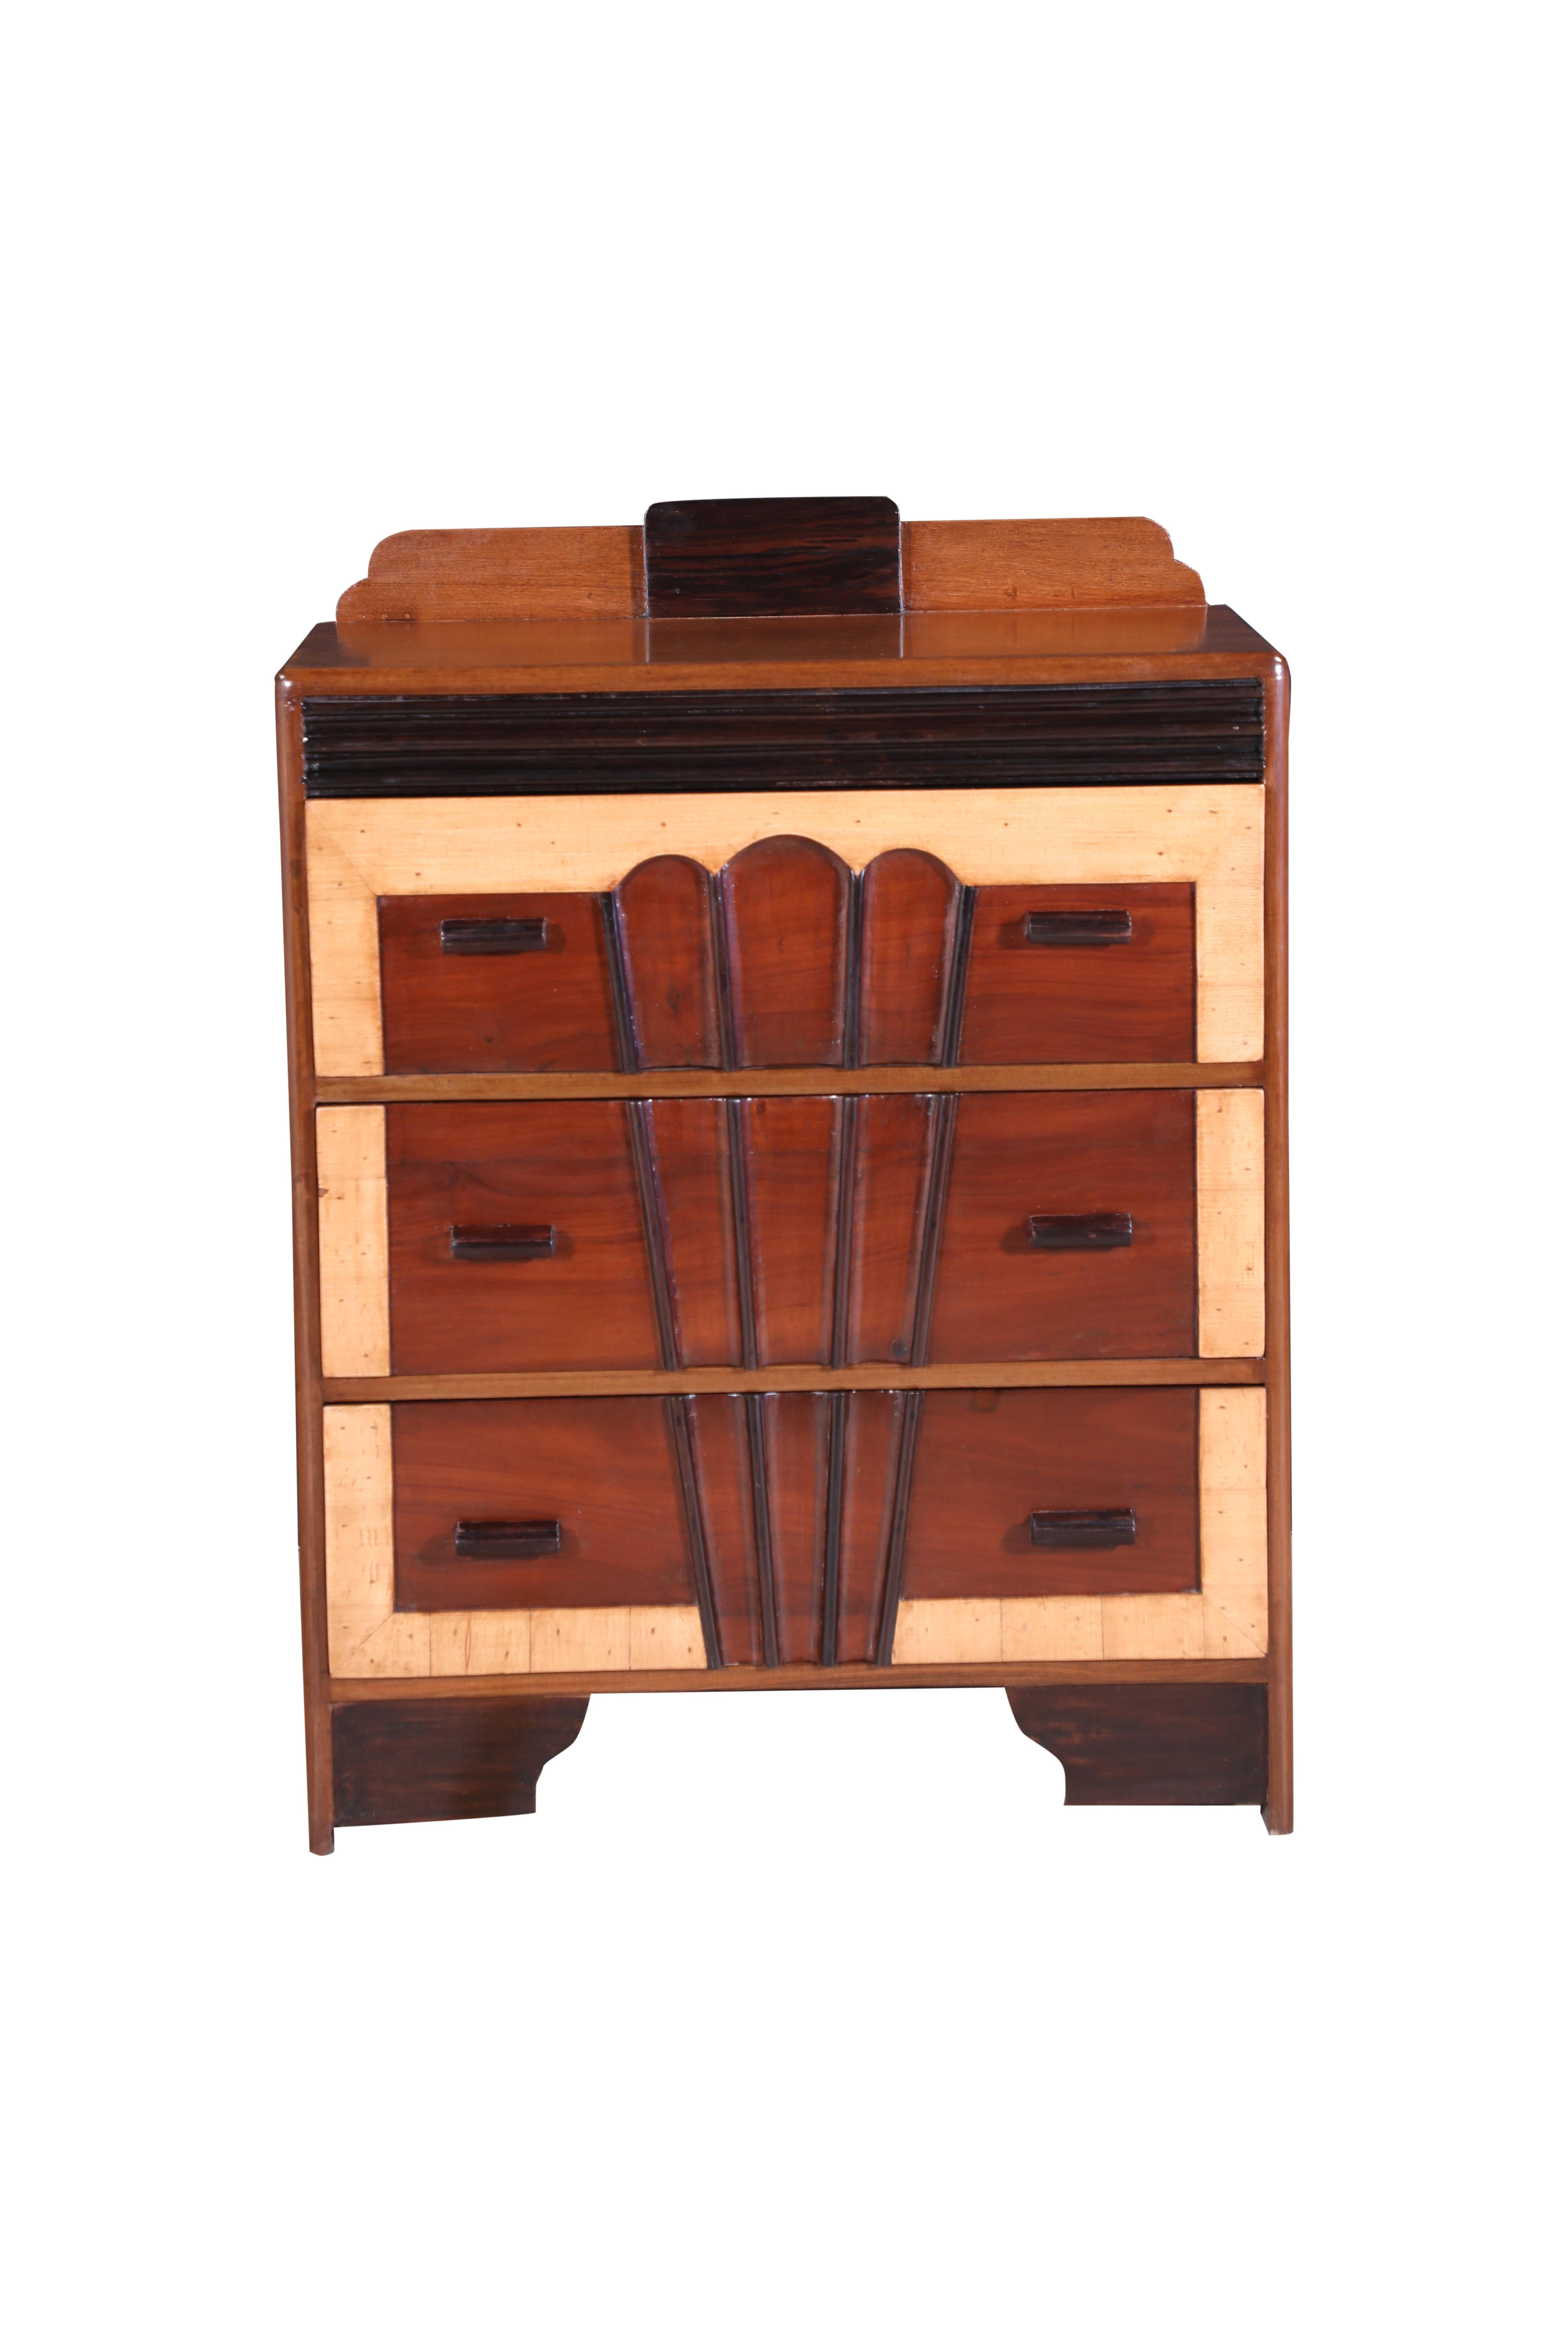 A late Art Deco Chest of Drawers or Dresser.  The body is predominantly teak wood with a satinwood border and additional detailing in rosewood including the drawer pulls.  All exotic hardwoods which made this piece easy to bring back to life through